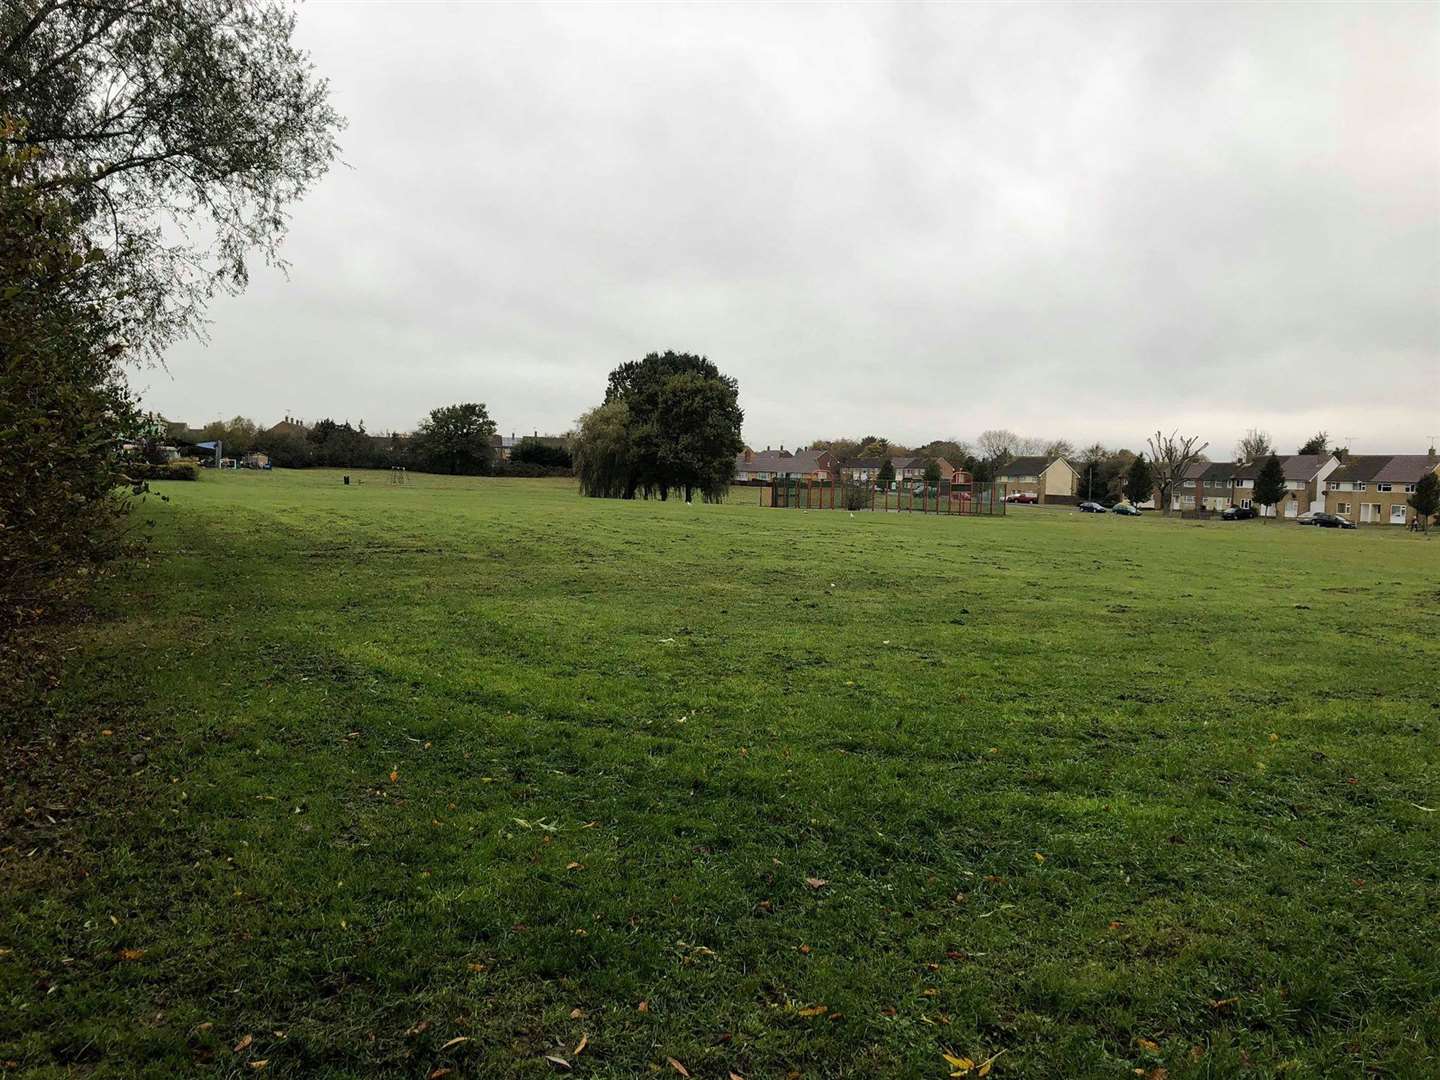 The proposed site is on a playing field